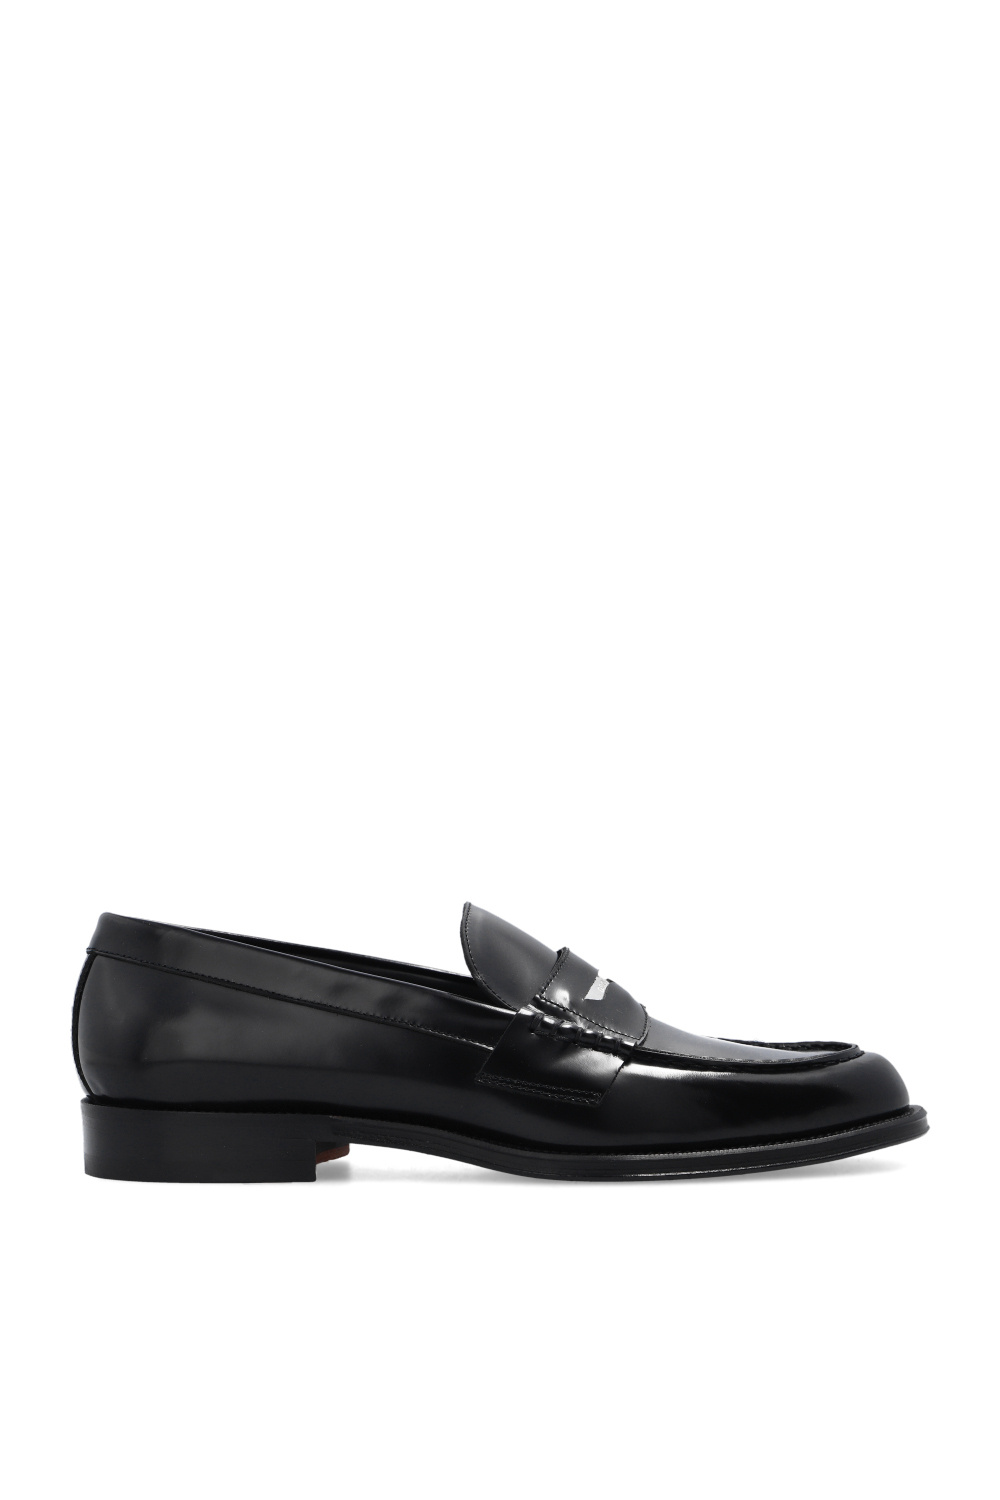 Dsquared2 Leather loafers | Men's Shoes | Vitkac